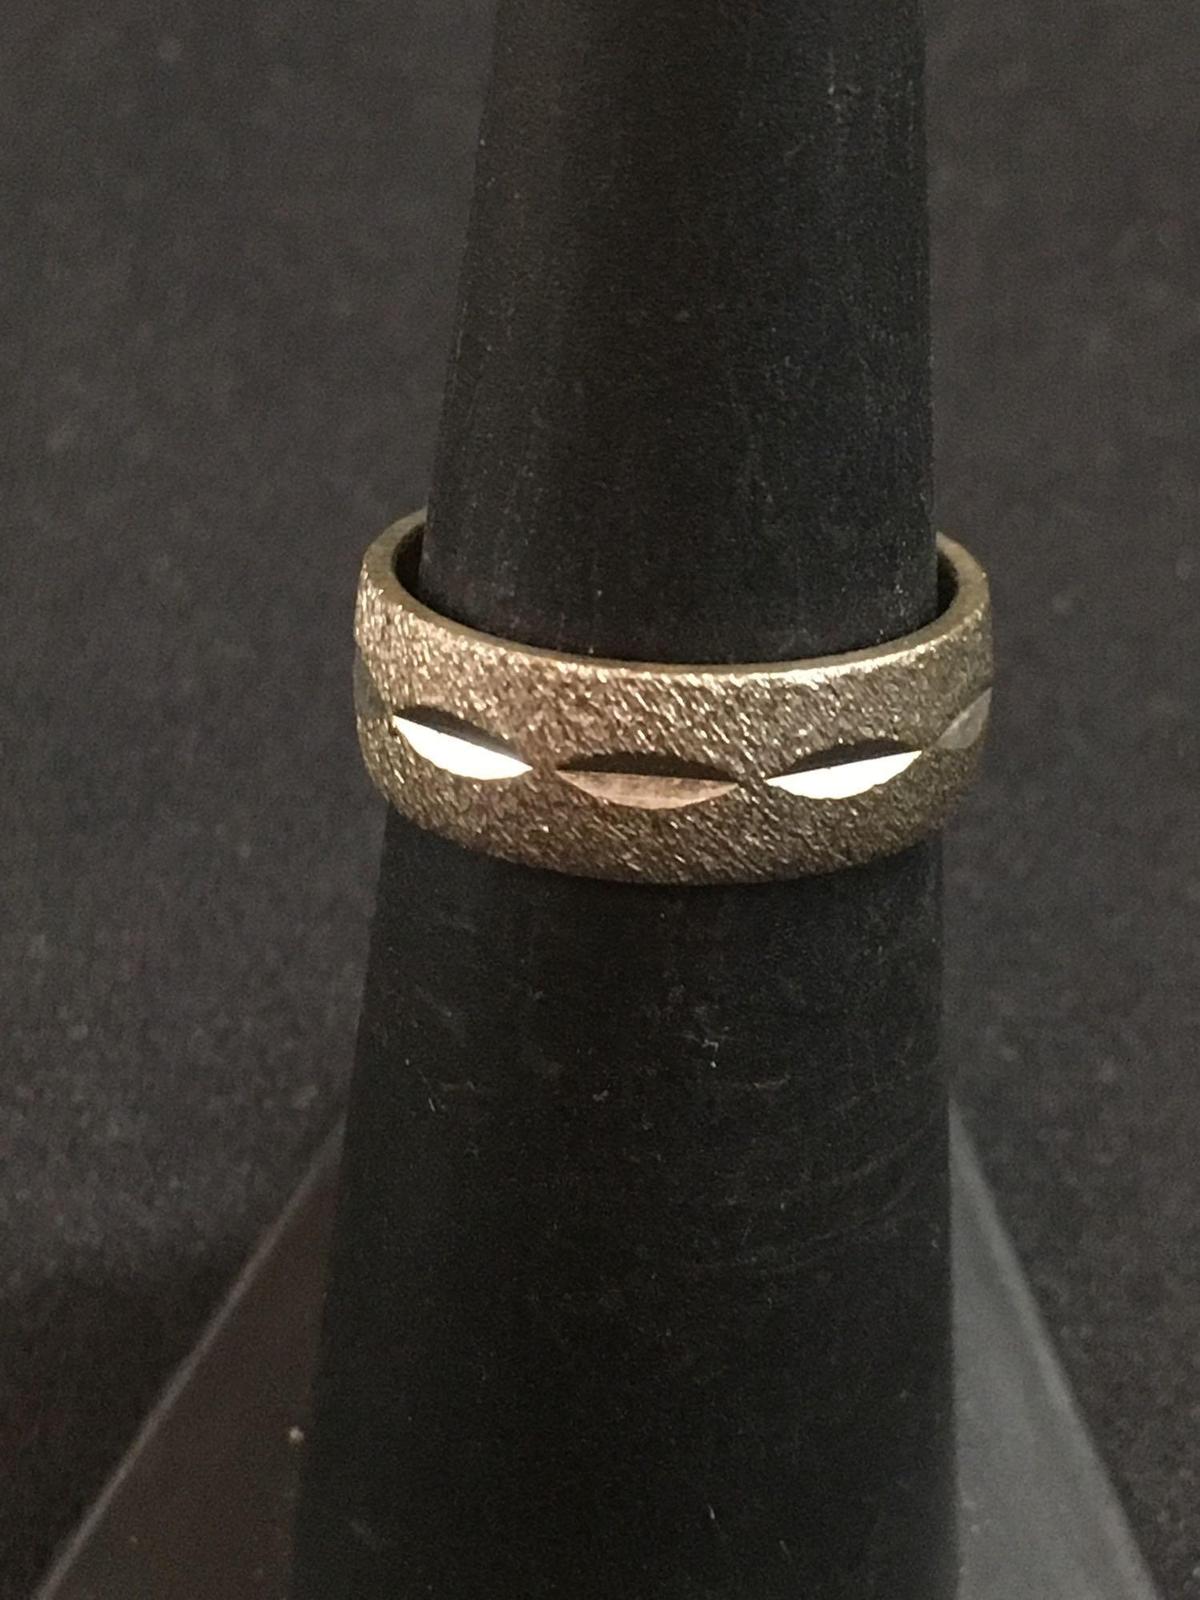 Hand-Etched 18KT Gold Filled 6.0 mm Band - Size 5.5